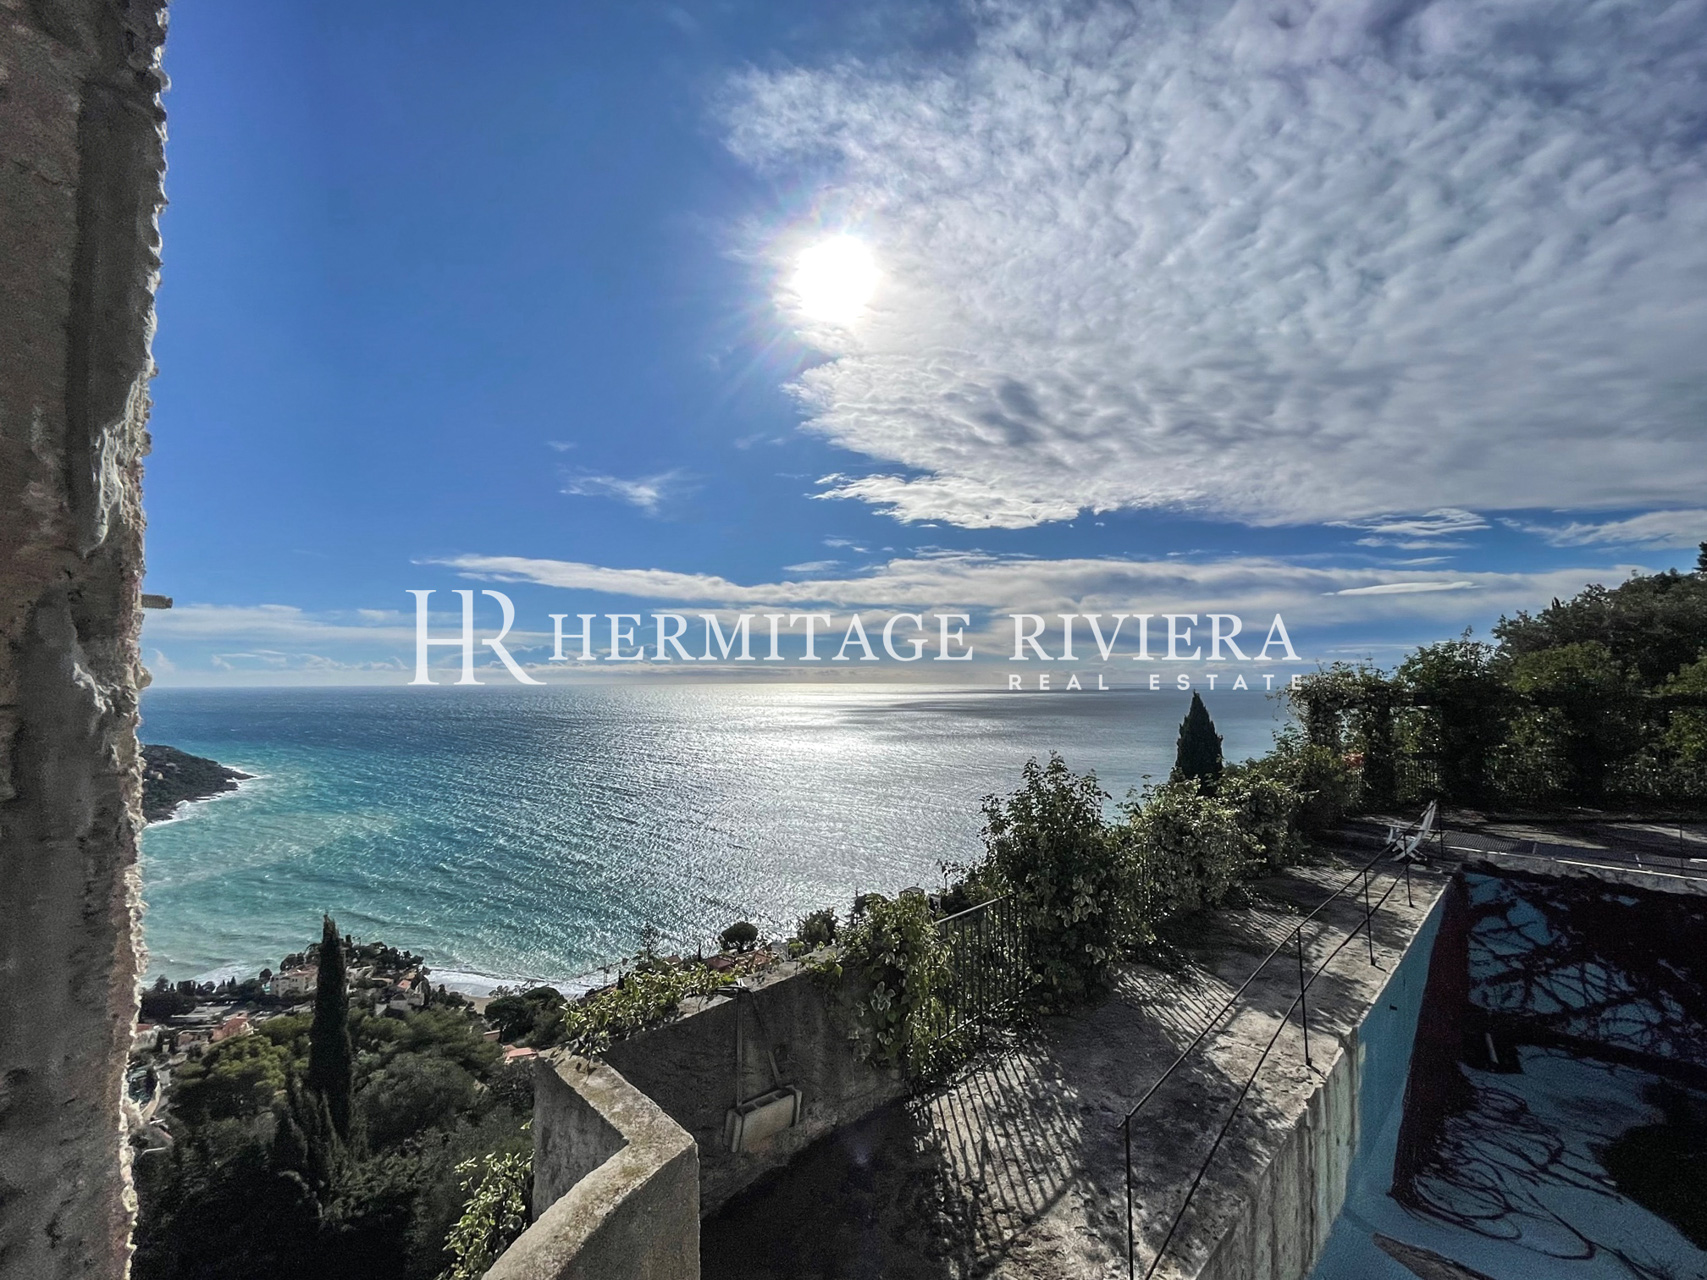 Property close Monaco with panoramic view  (image 11)